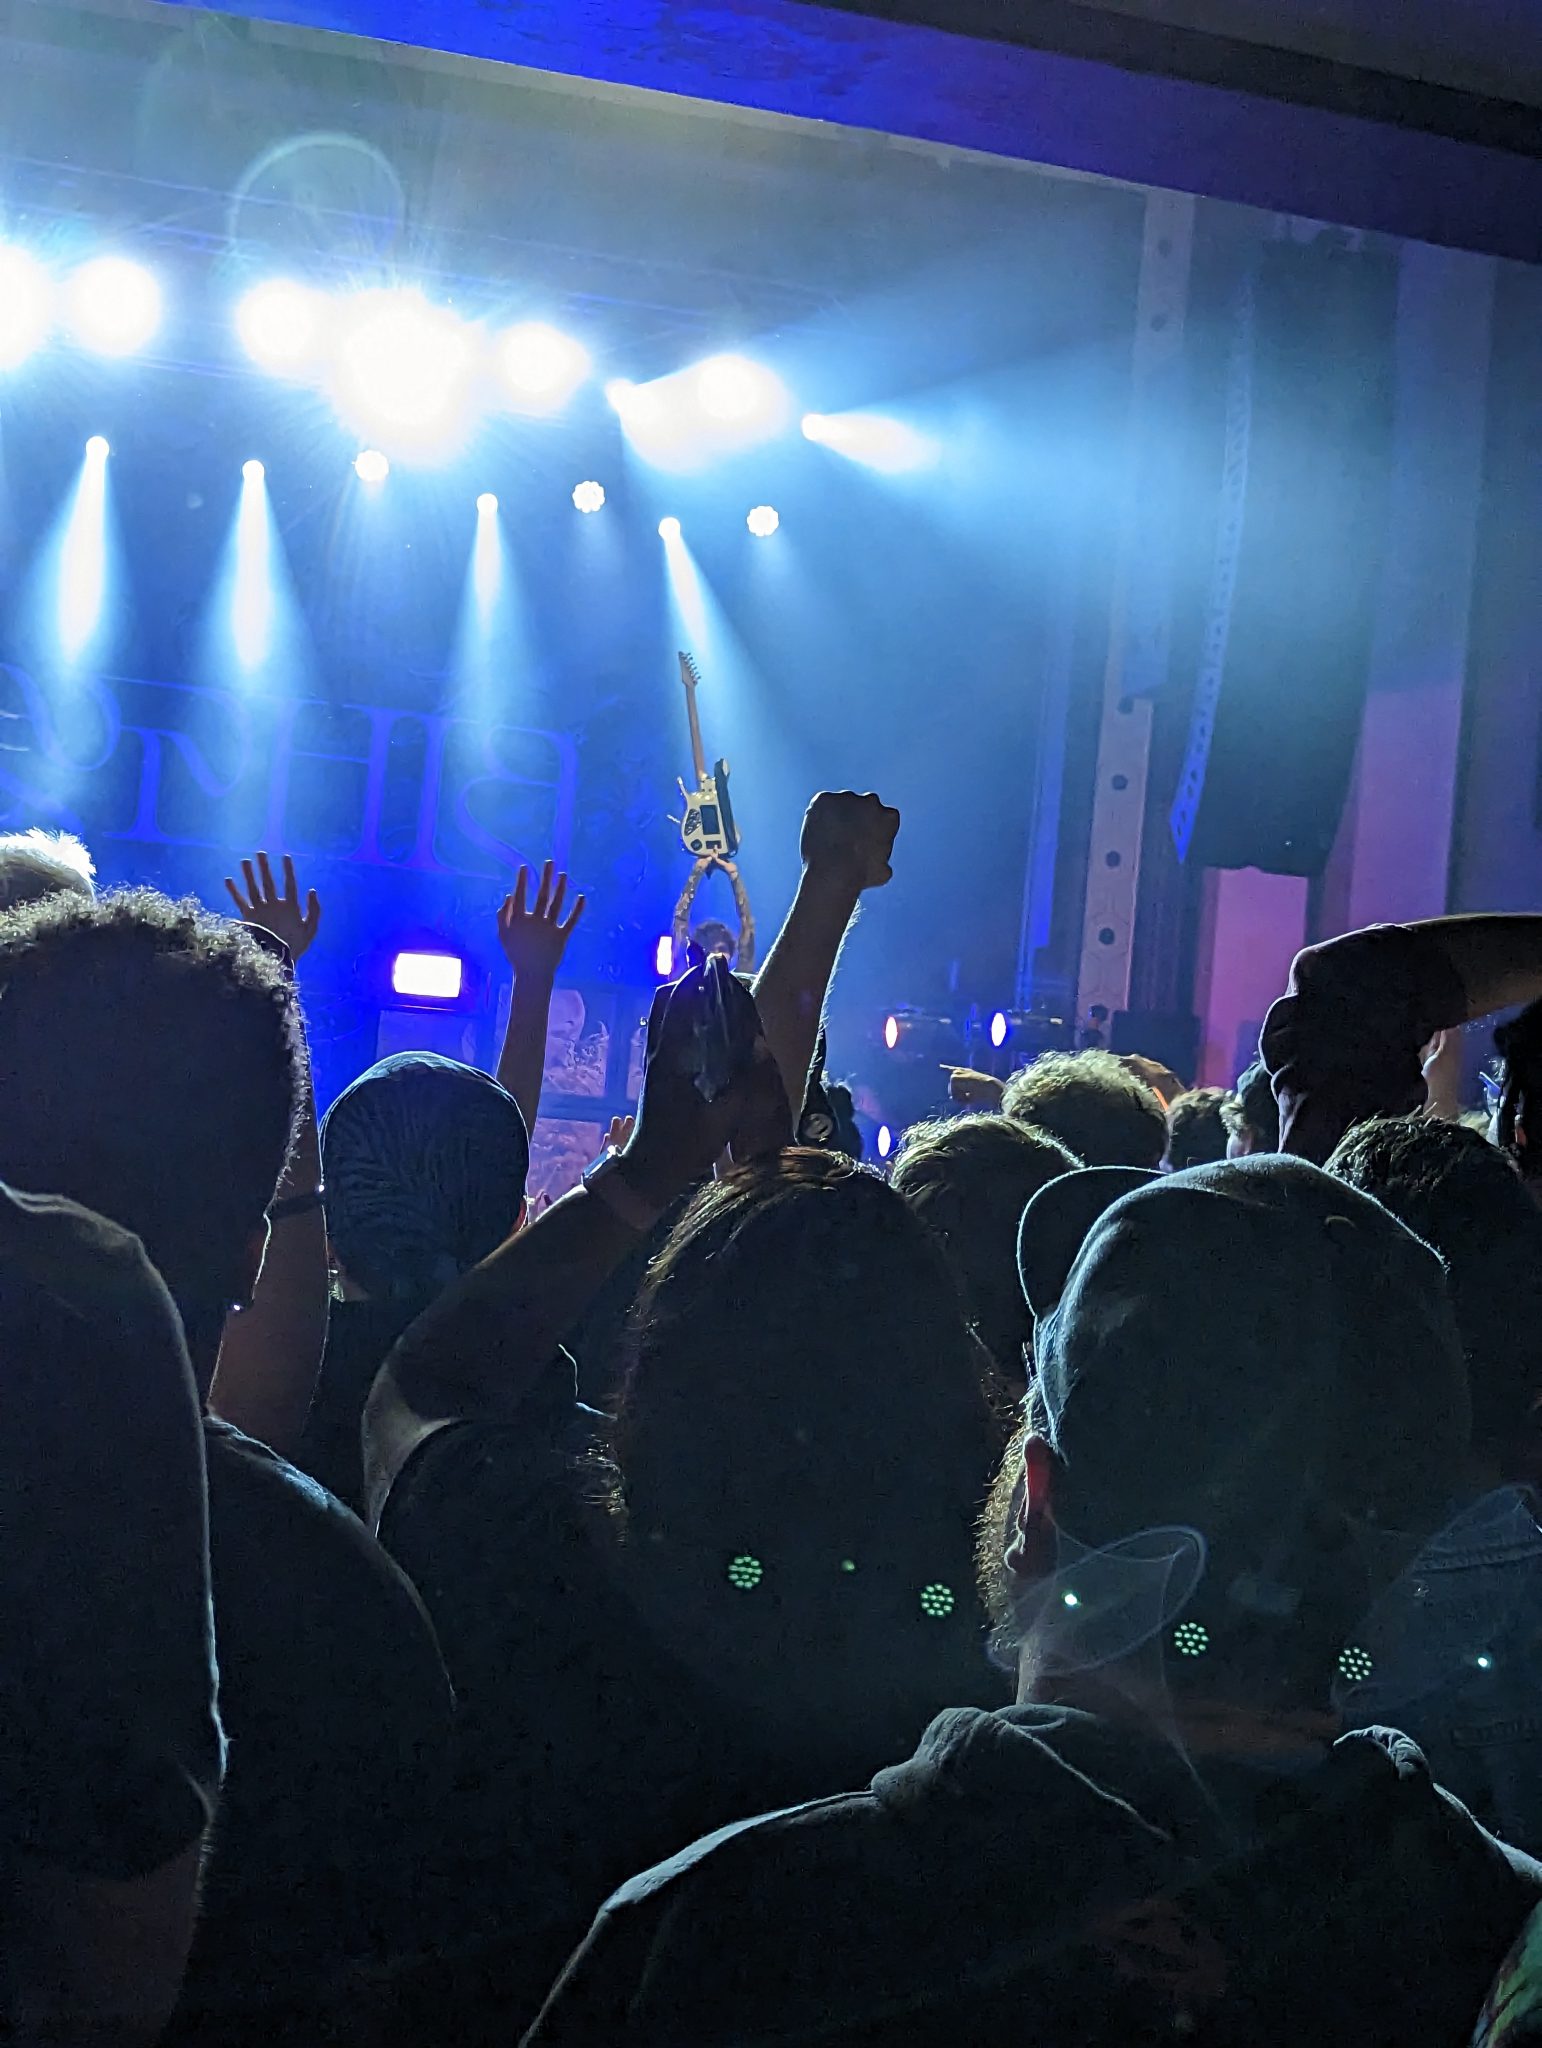 A shadow crowd at a concert